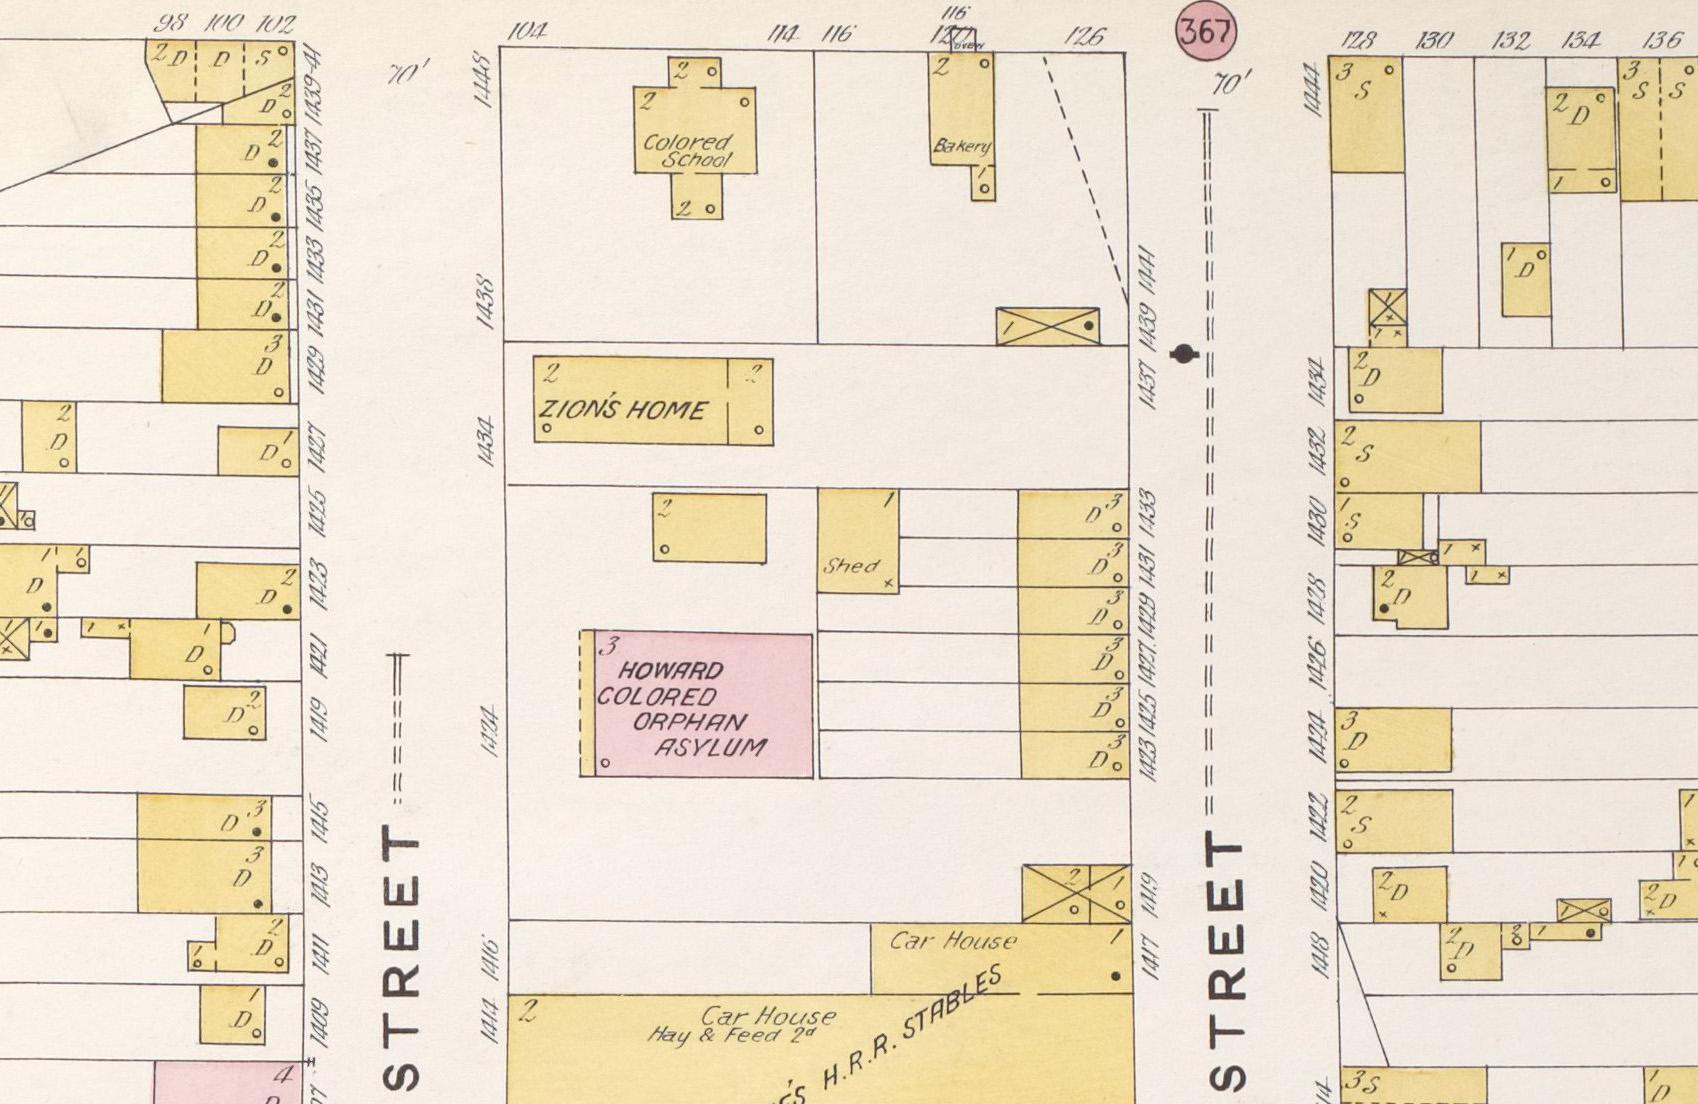 map showing a wood frame building labeled zion's home